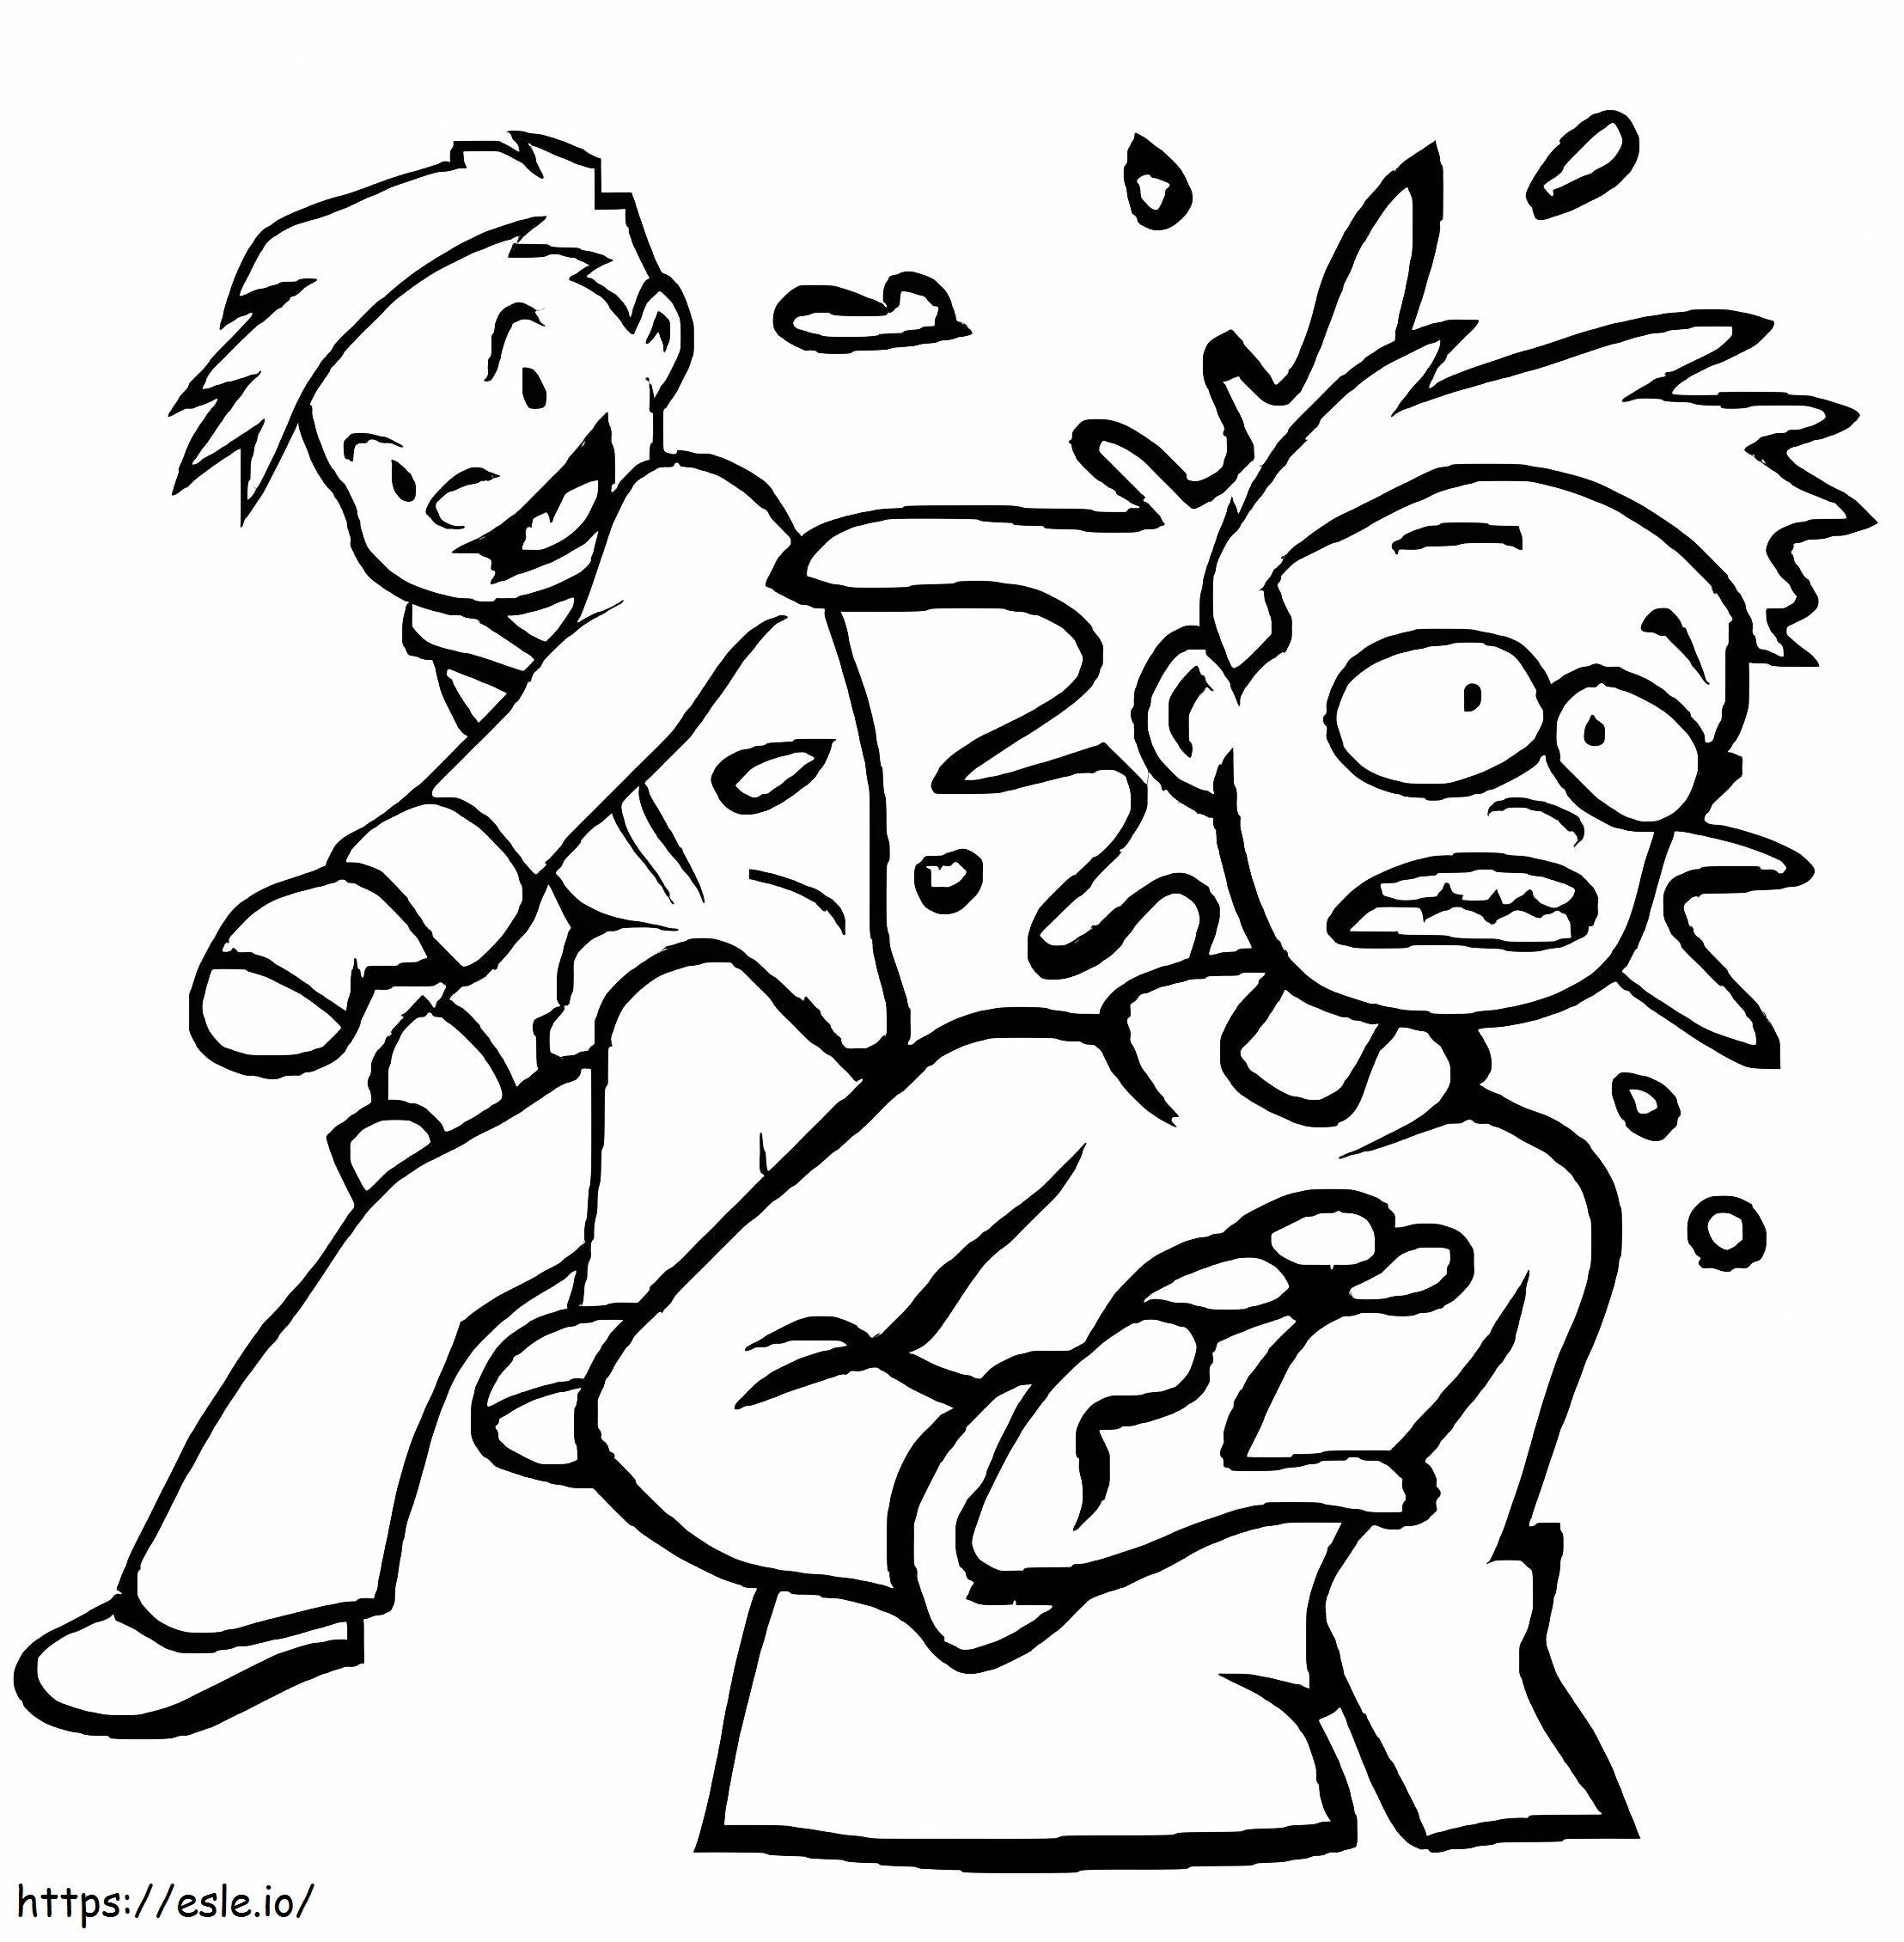 Snowball Fight 2 coloring page